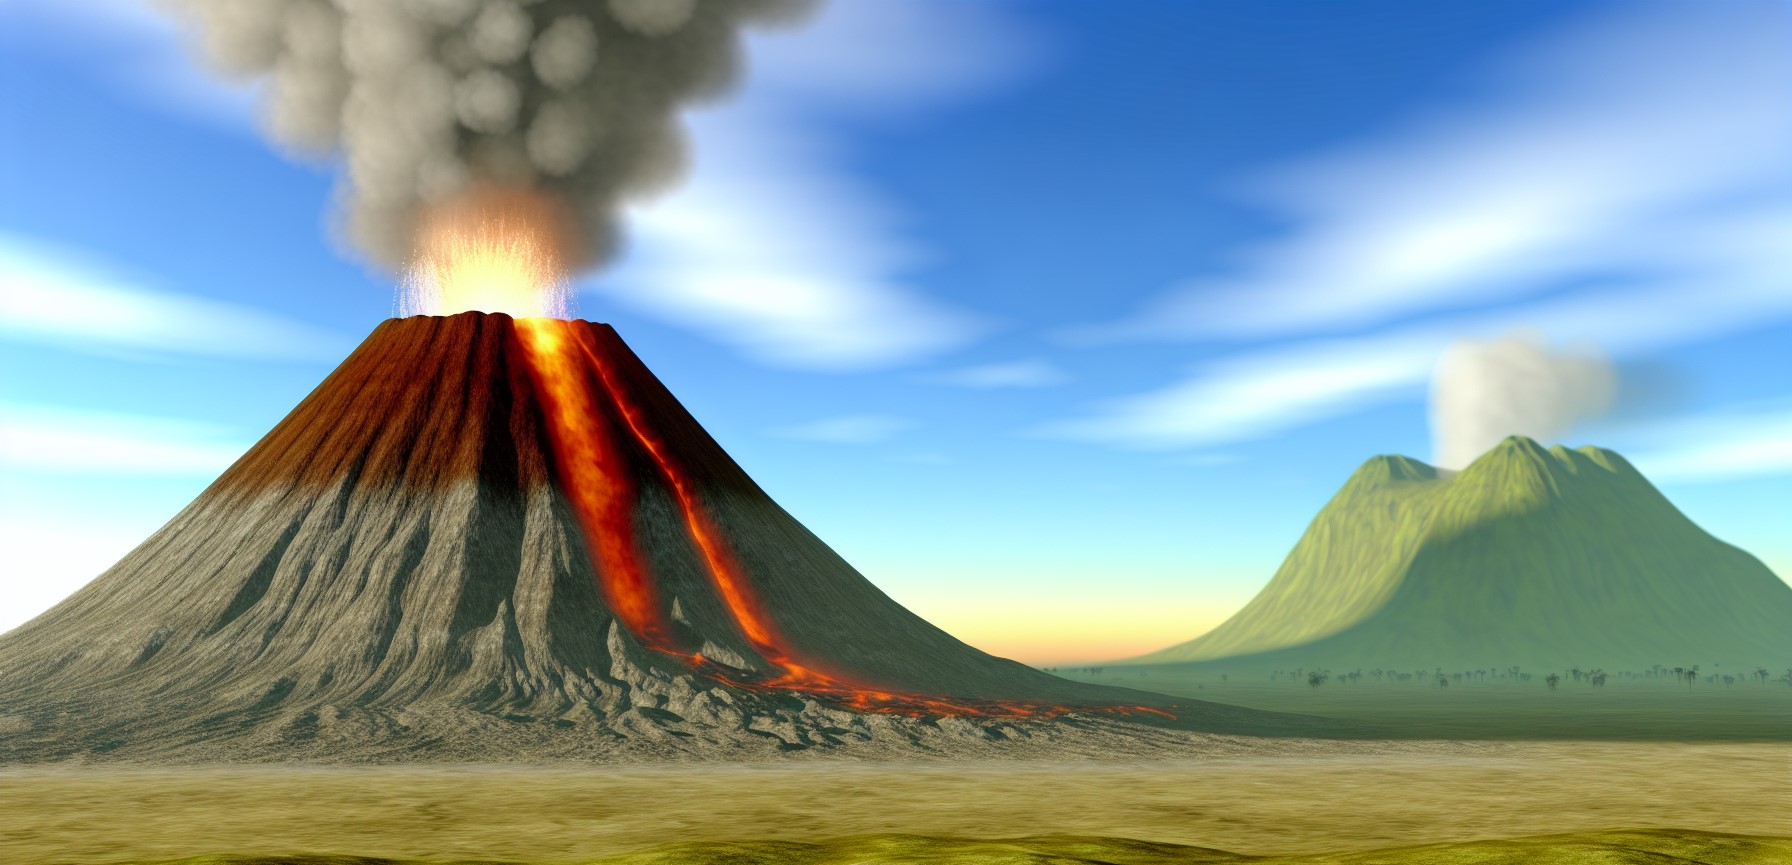 A volcano in the early stages of eruption with lava and smoke beginning to flow out of the opening